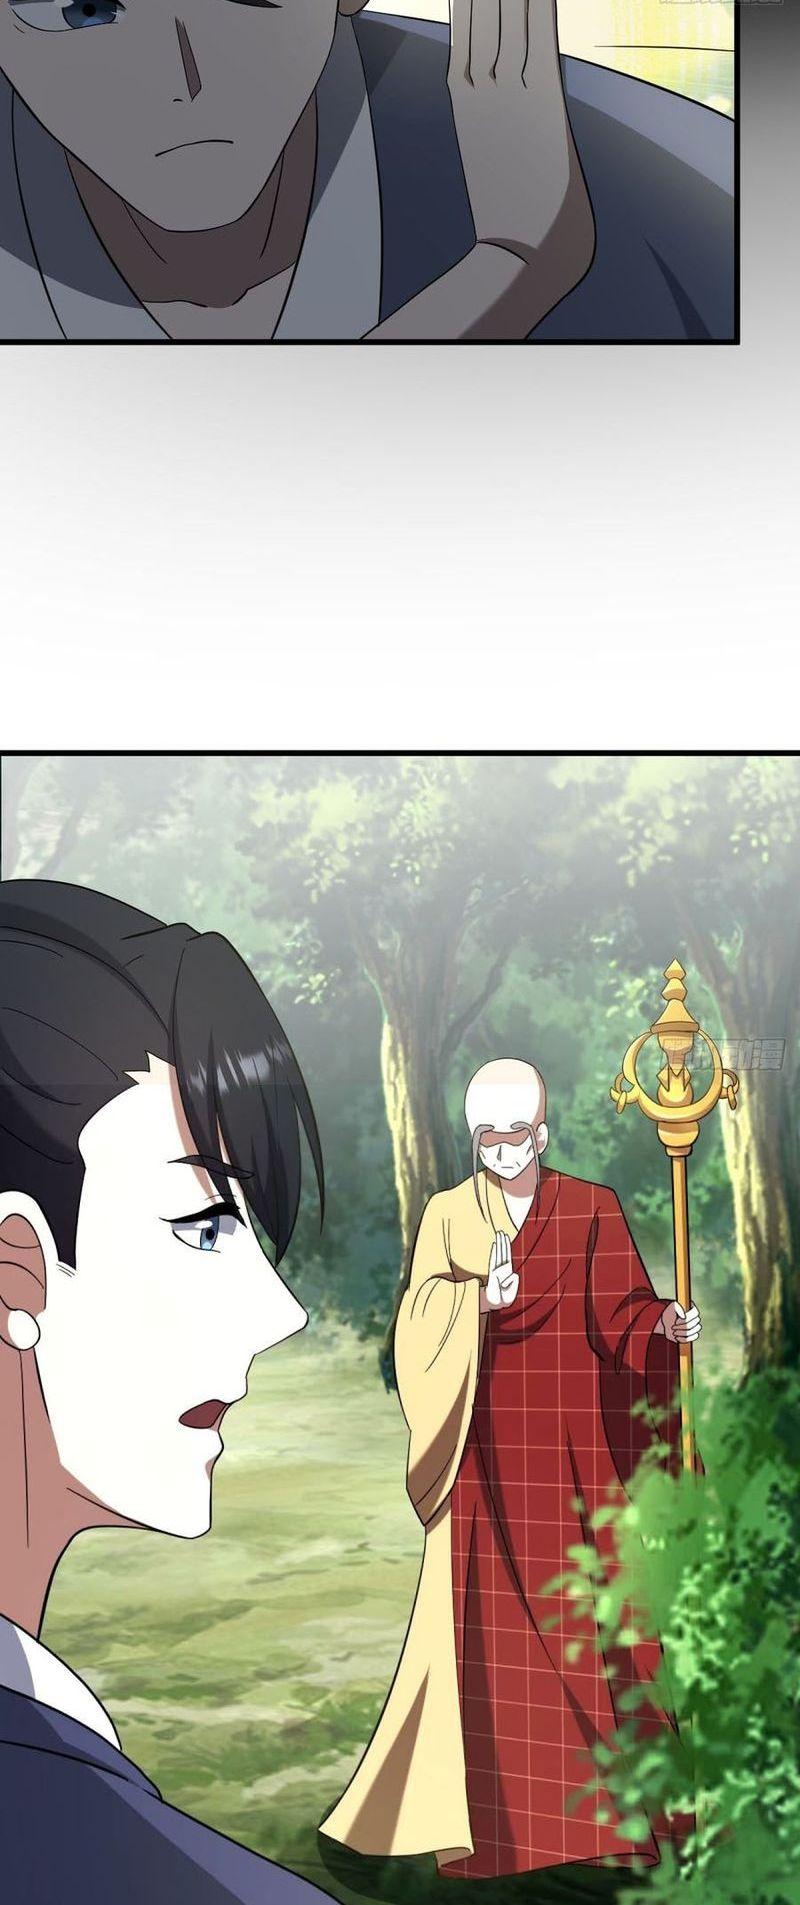 Invincible After 100 Years of Seclusion - chapter 96 - #6